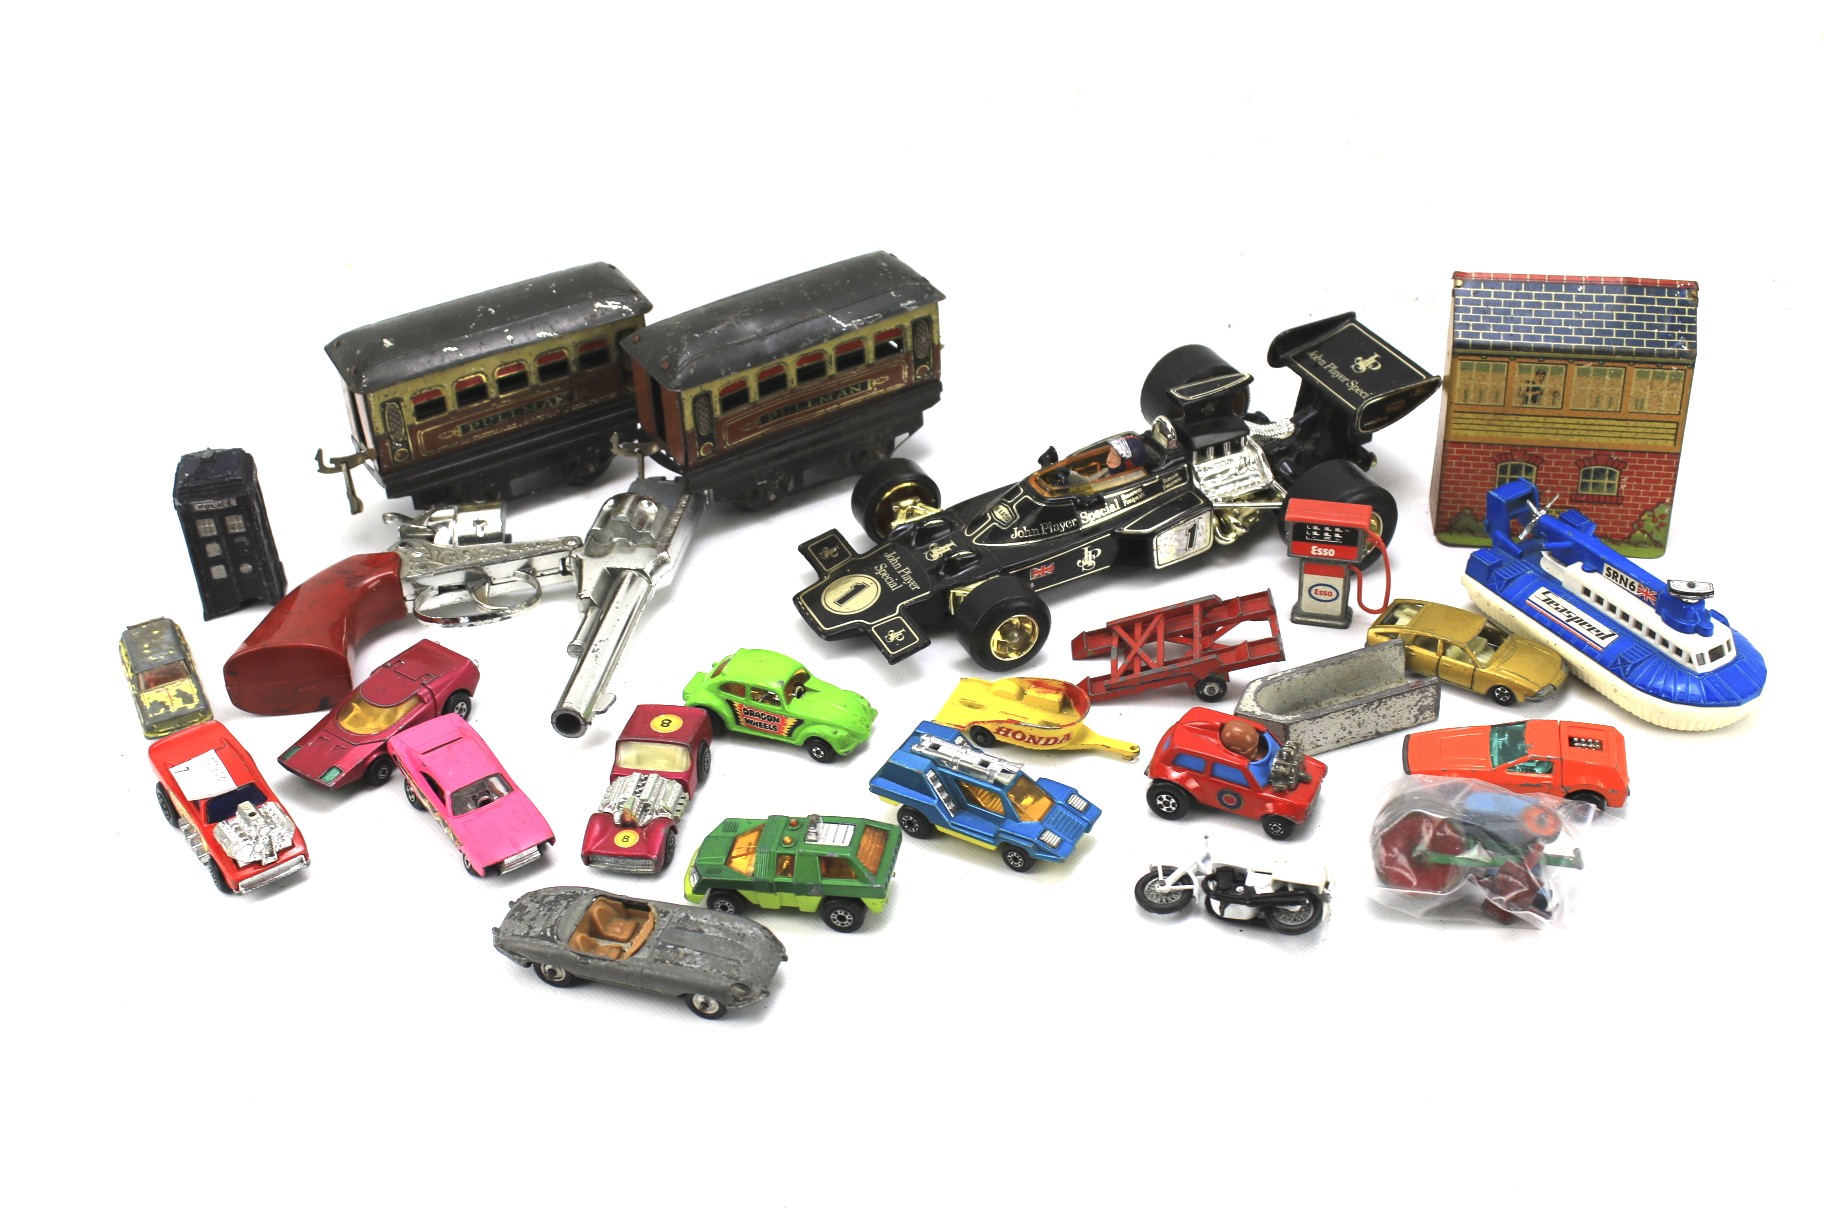 An assortment diecast model vehicles and other similar items.